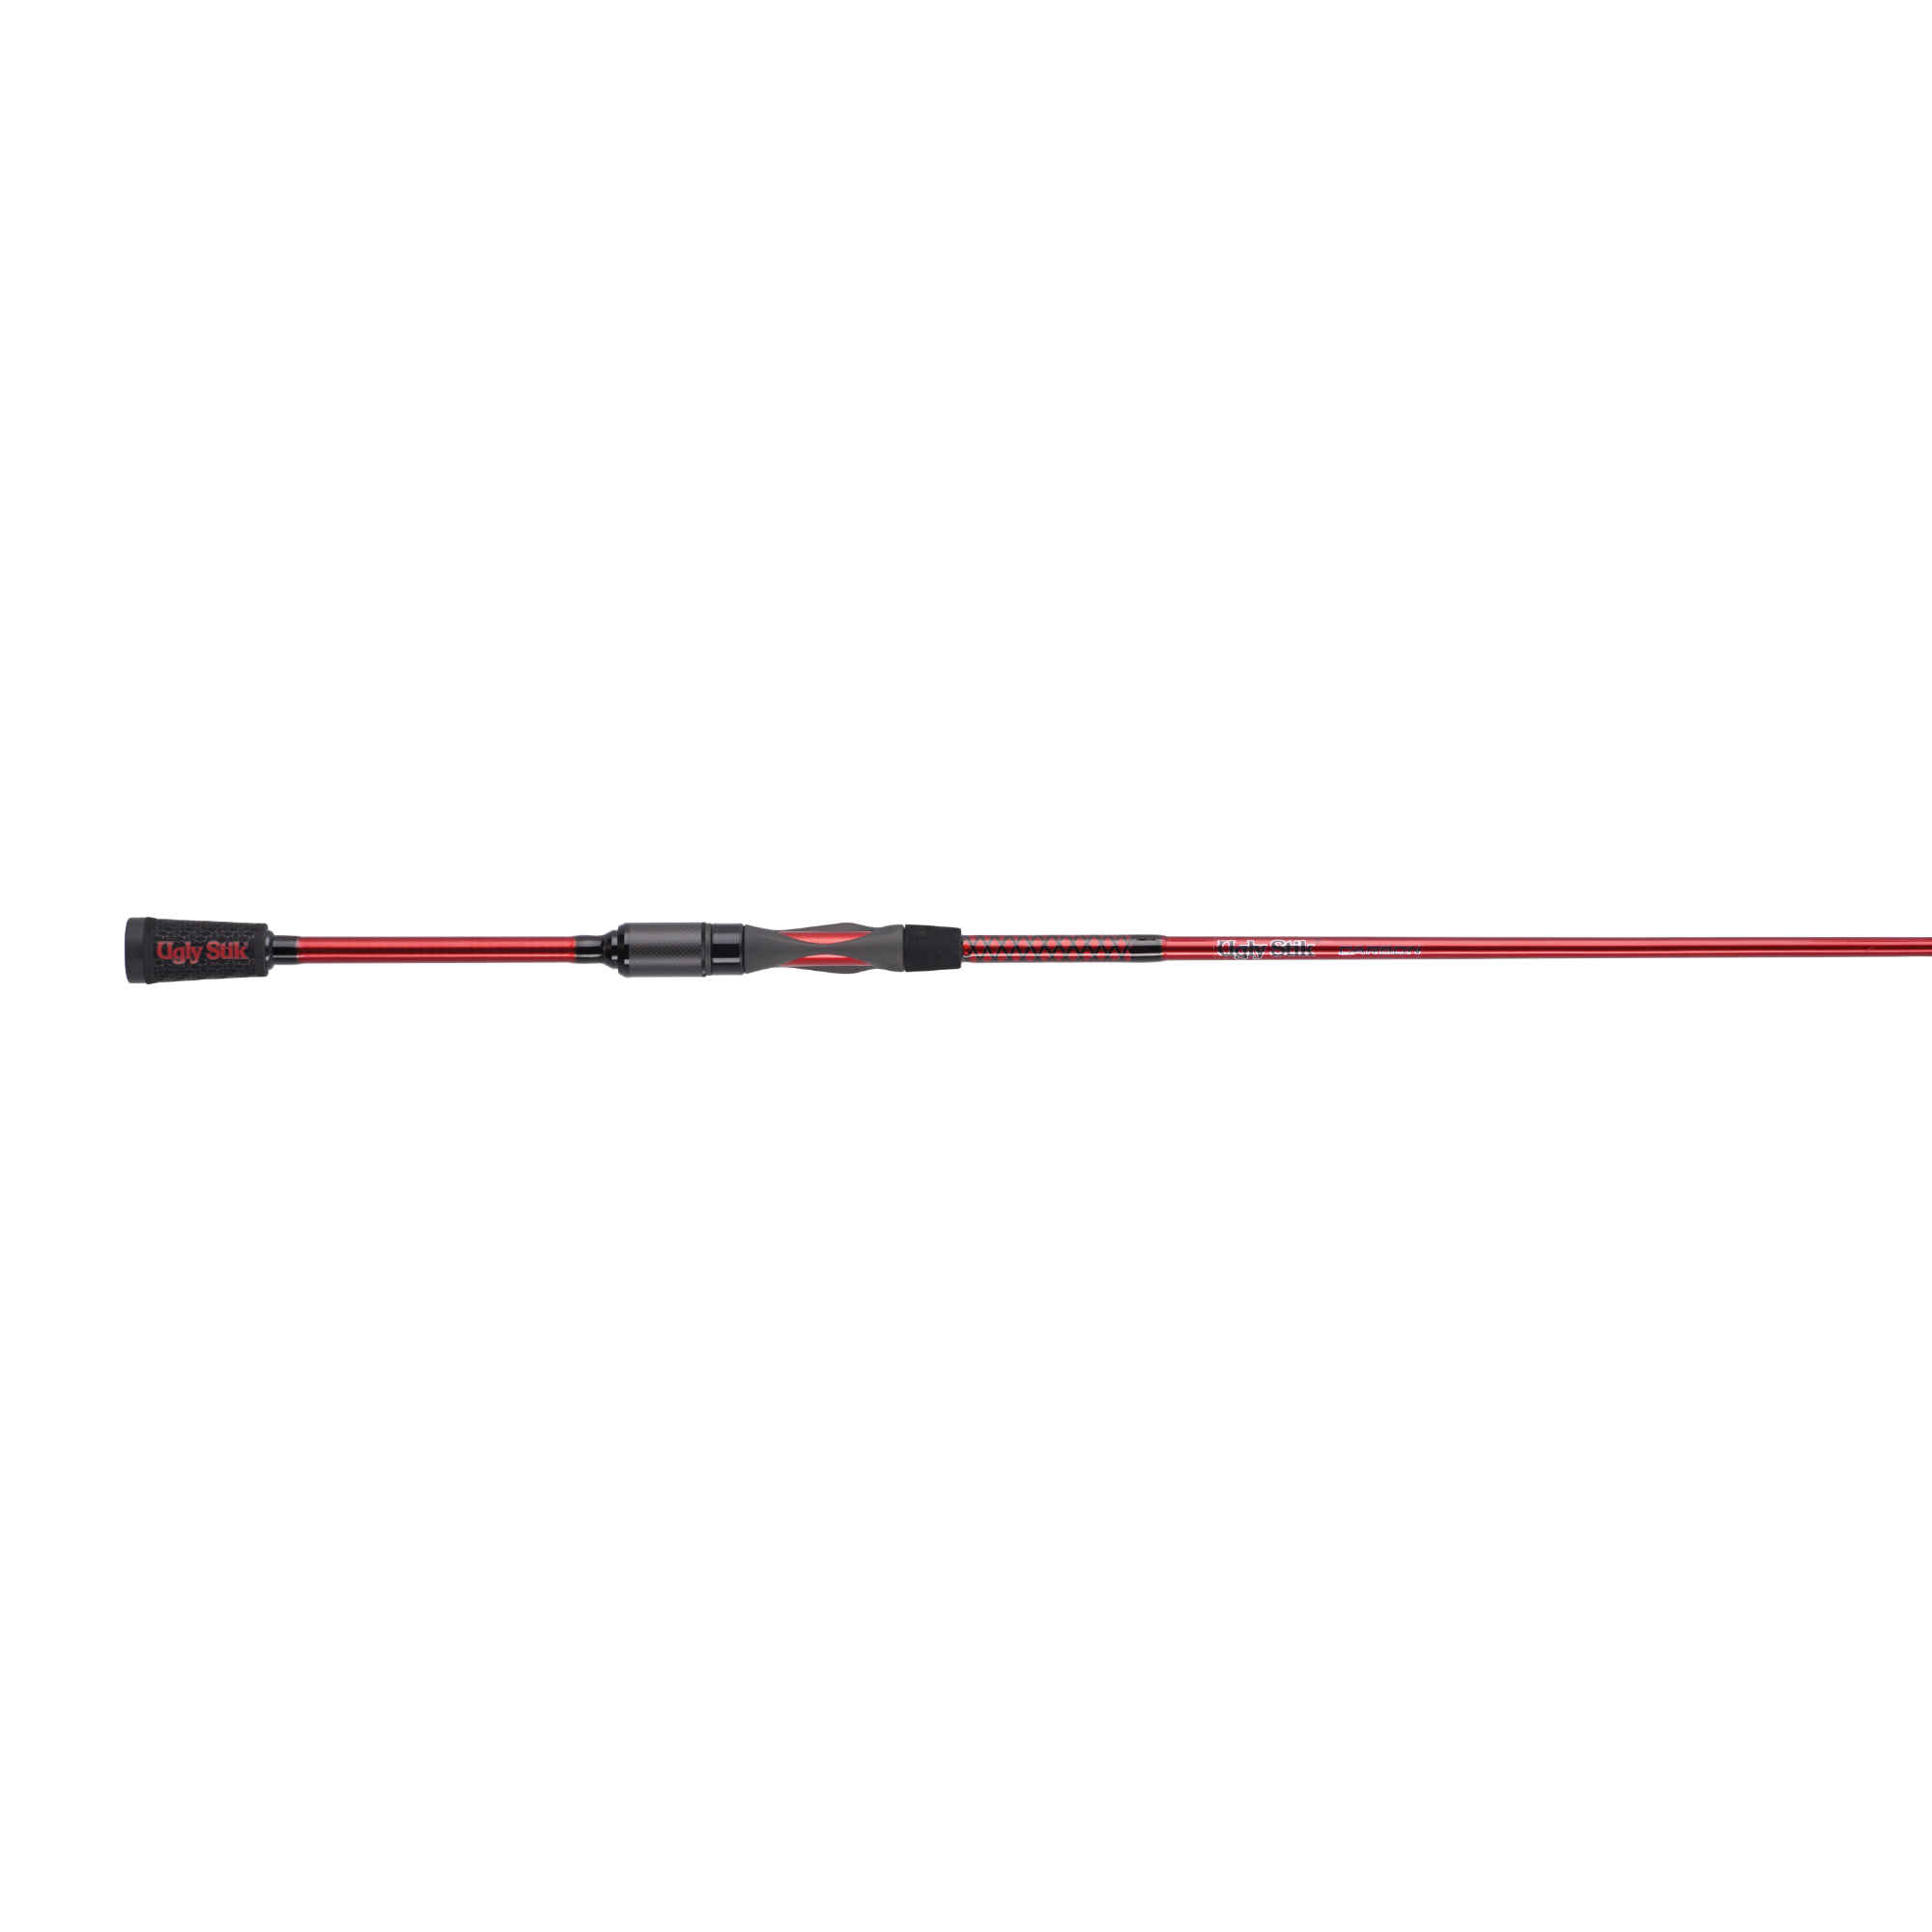 Ugly Stik Carbon Spinning Rod, 2 Piece, Light, Moderate/Fast, 7 Guides,  1/16-1/4oz Lures USCBSP562L with Free S&H — CampSaver